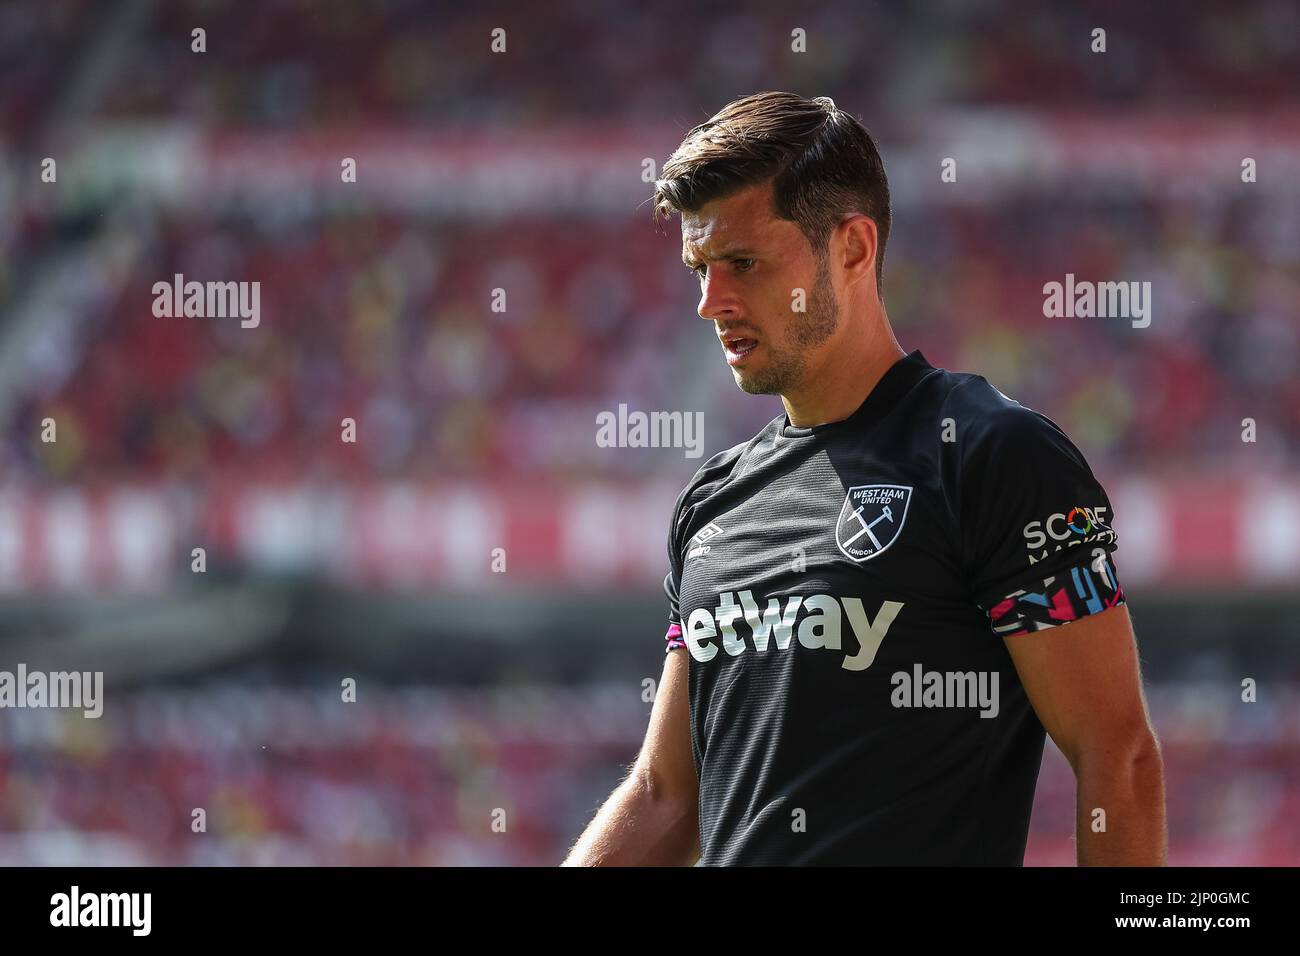 Aaron Cresswell #3 of West Ham United during the game Stock Photo